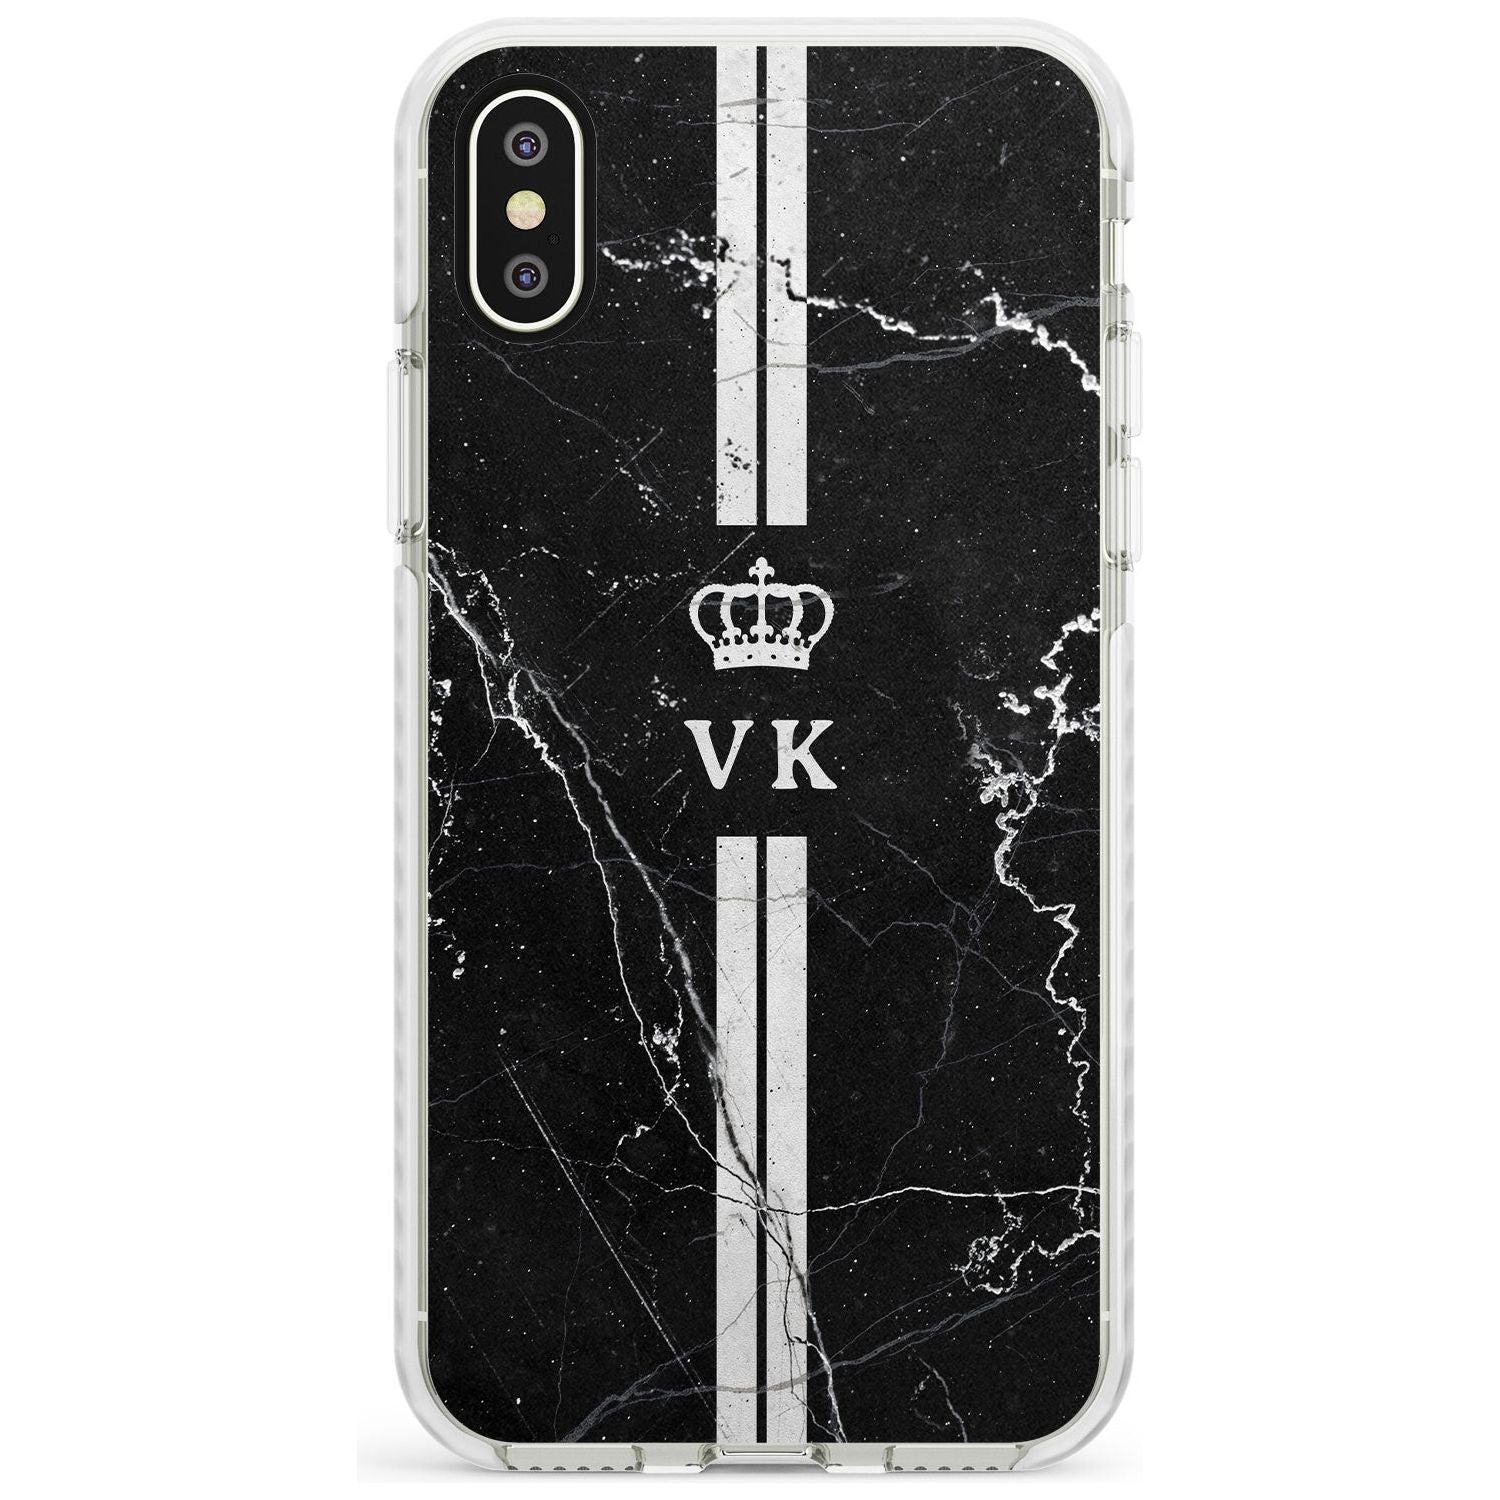 Stripes + Initials with Crown on Black Marble Impact Phone Case for iPhone X XS Max XR